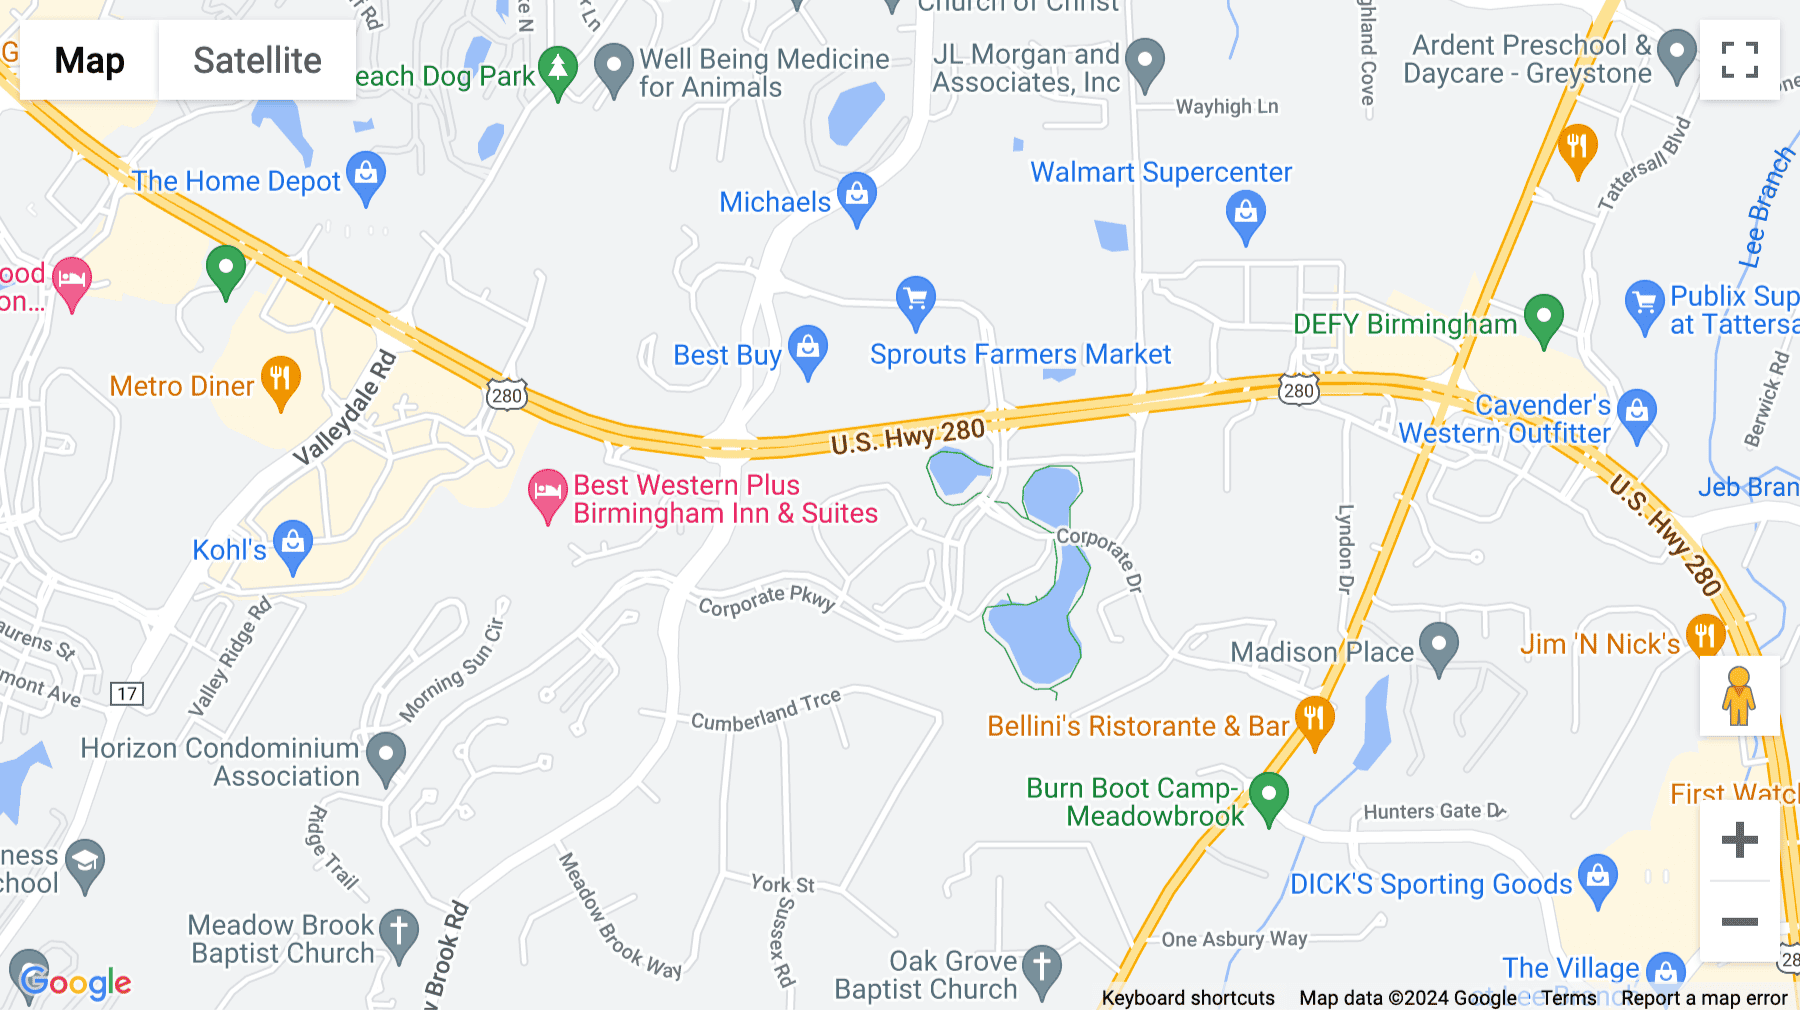 Click for interative map of 4000 Eagle Point Corporate Dr., Eagle Point Office Park, Birmingham